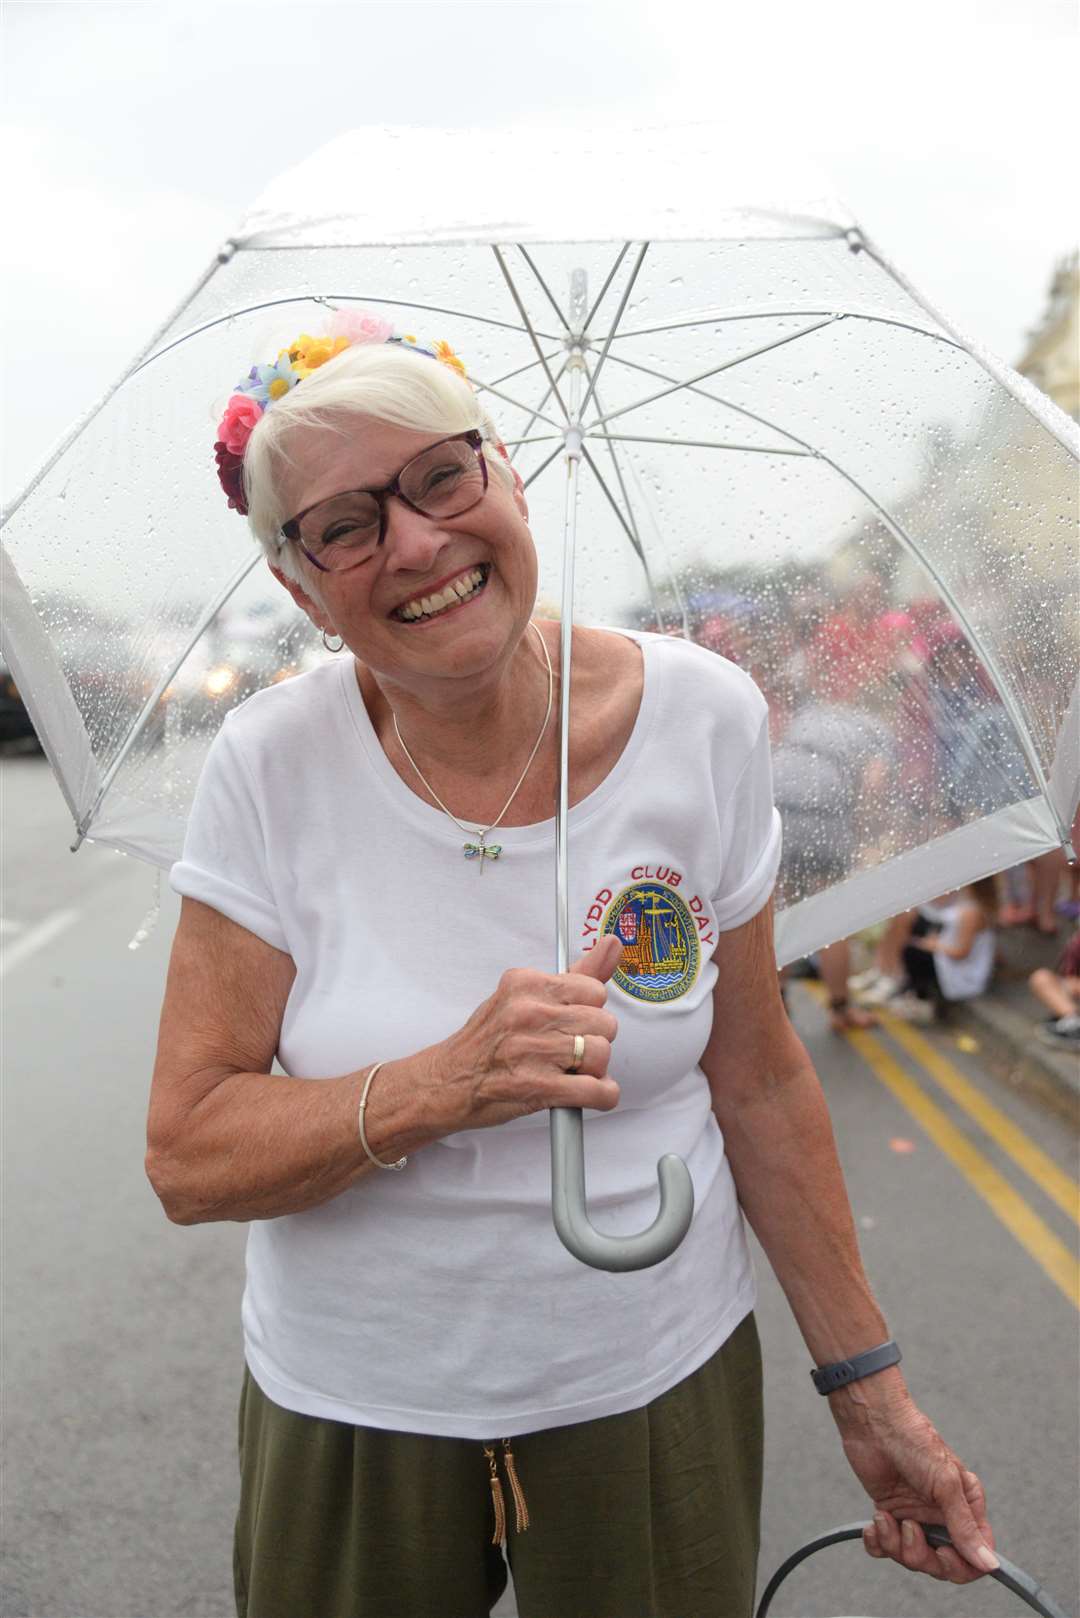 The rain did not dampen spirits for this volunteer collector, but there was a worrying shortage of donations in all of the collection buckets this year